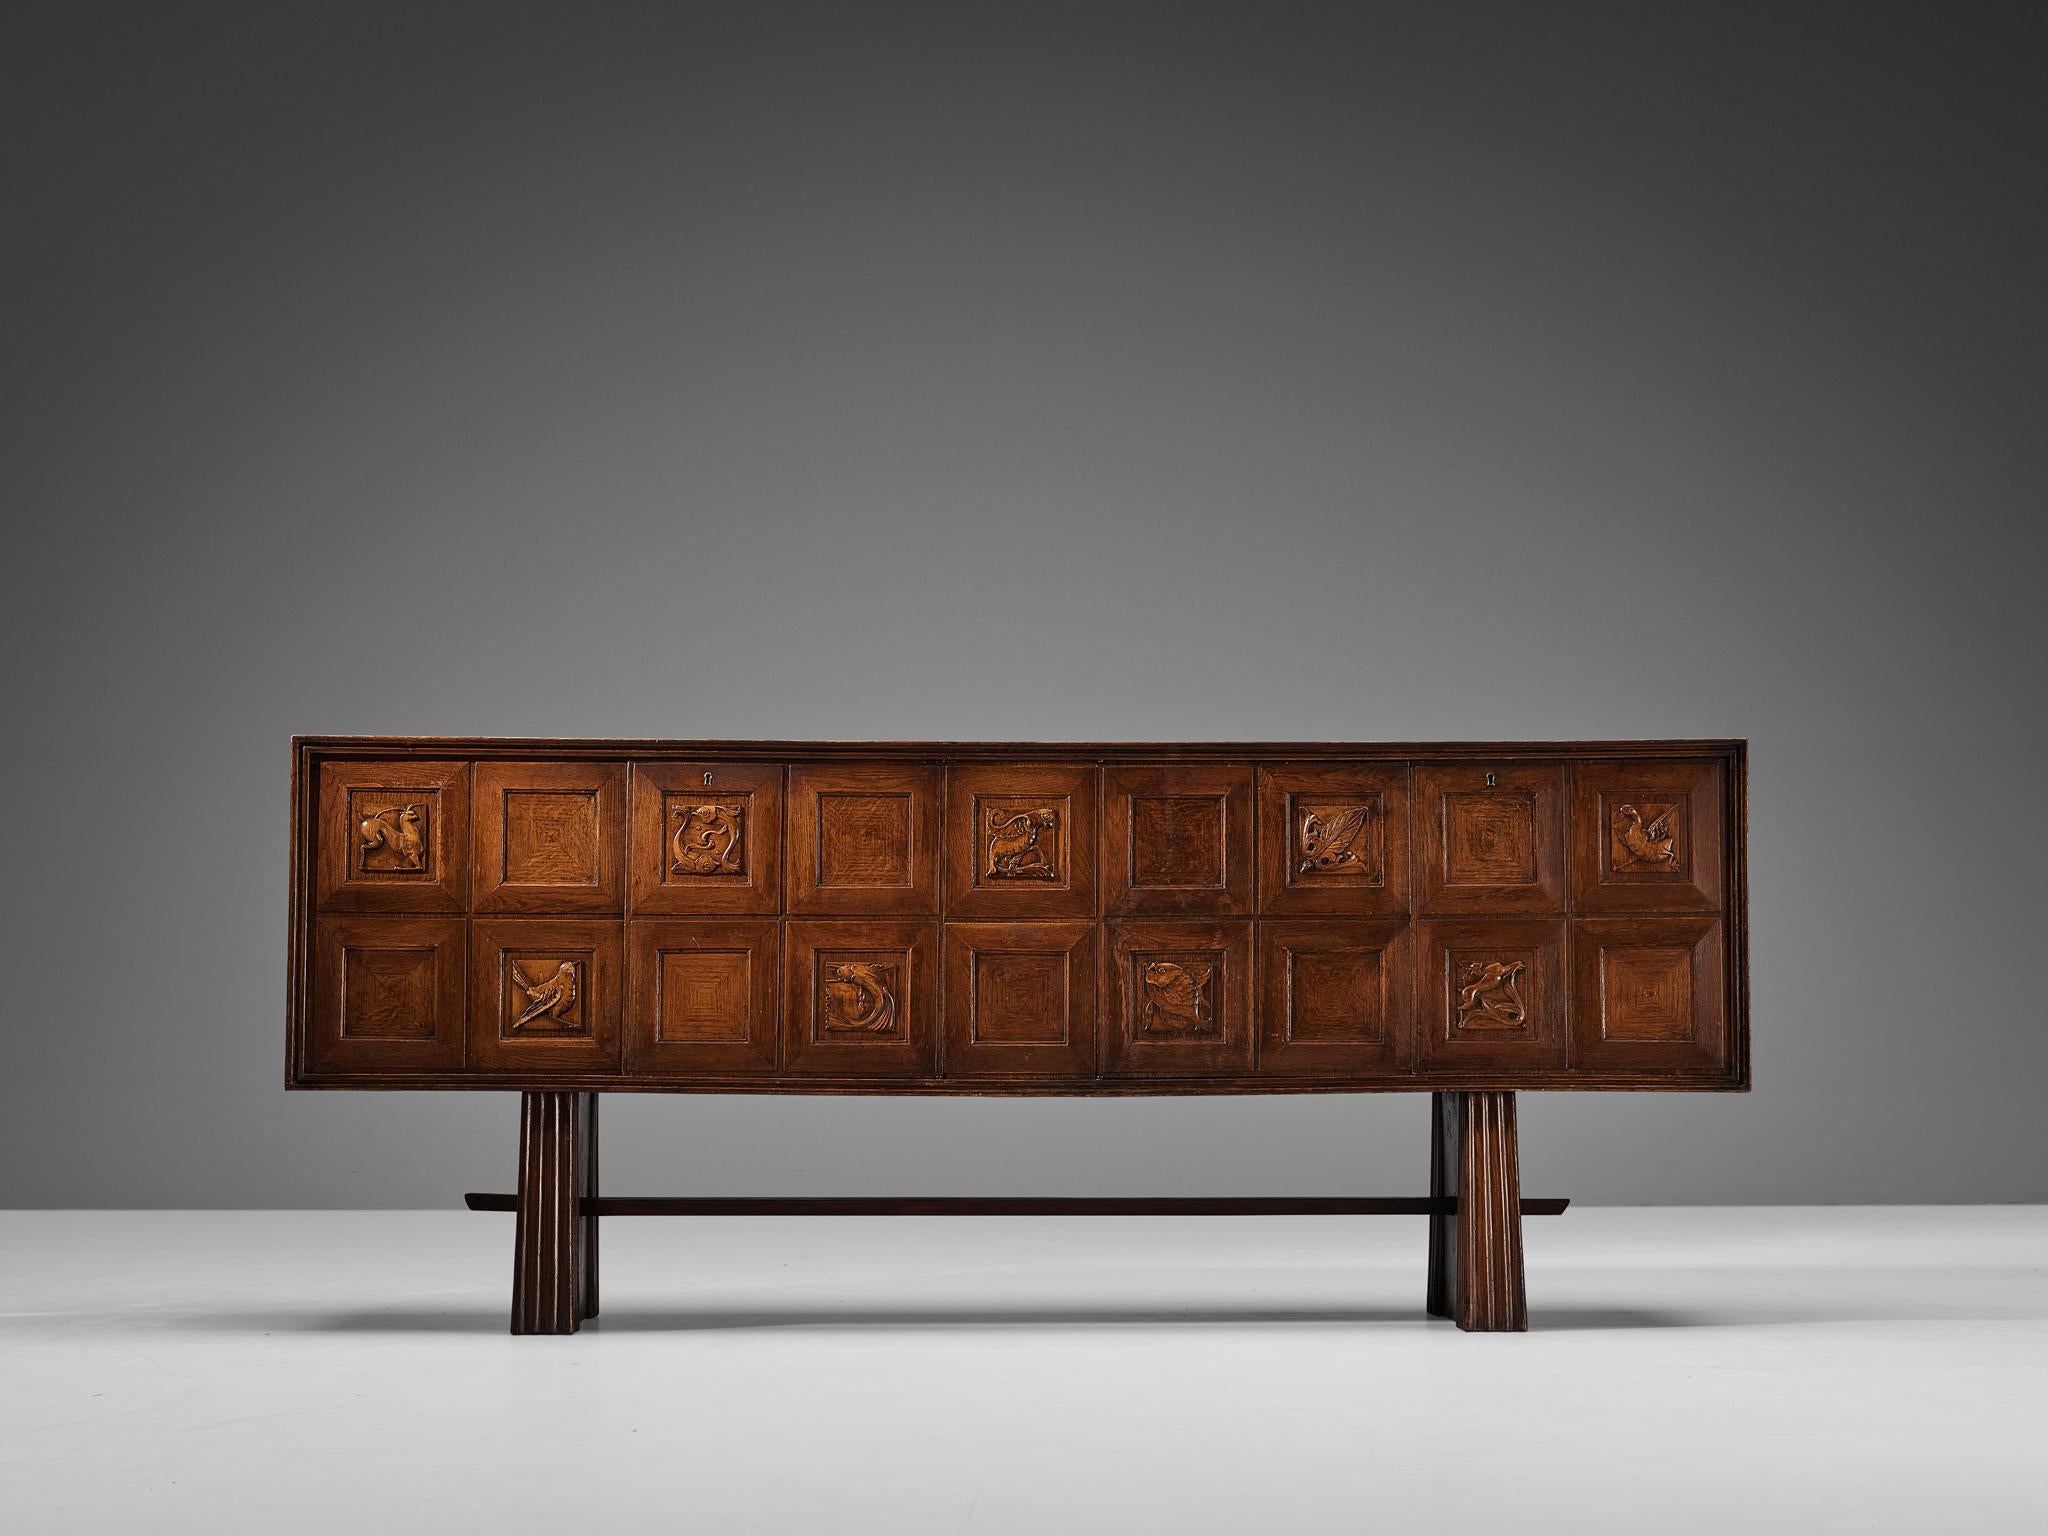 Pier Luigi Colli sideboard, oak, Italy, 1940s

This elegant and beautifully made sideboard is designed by Italian Pier Luigi Colli. The front of this piece has eighteen panels, that are decorated through amazing carving of the wood used. They are